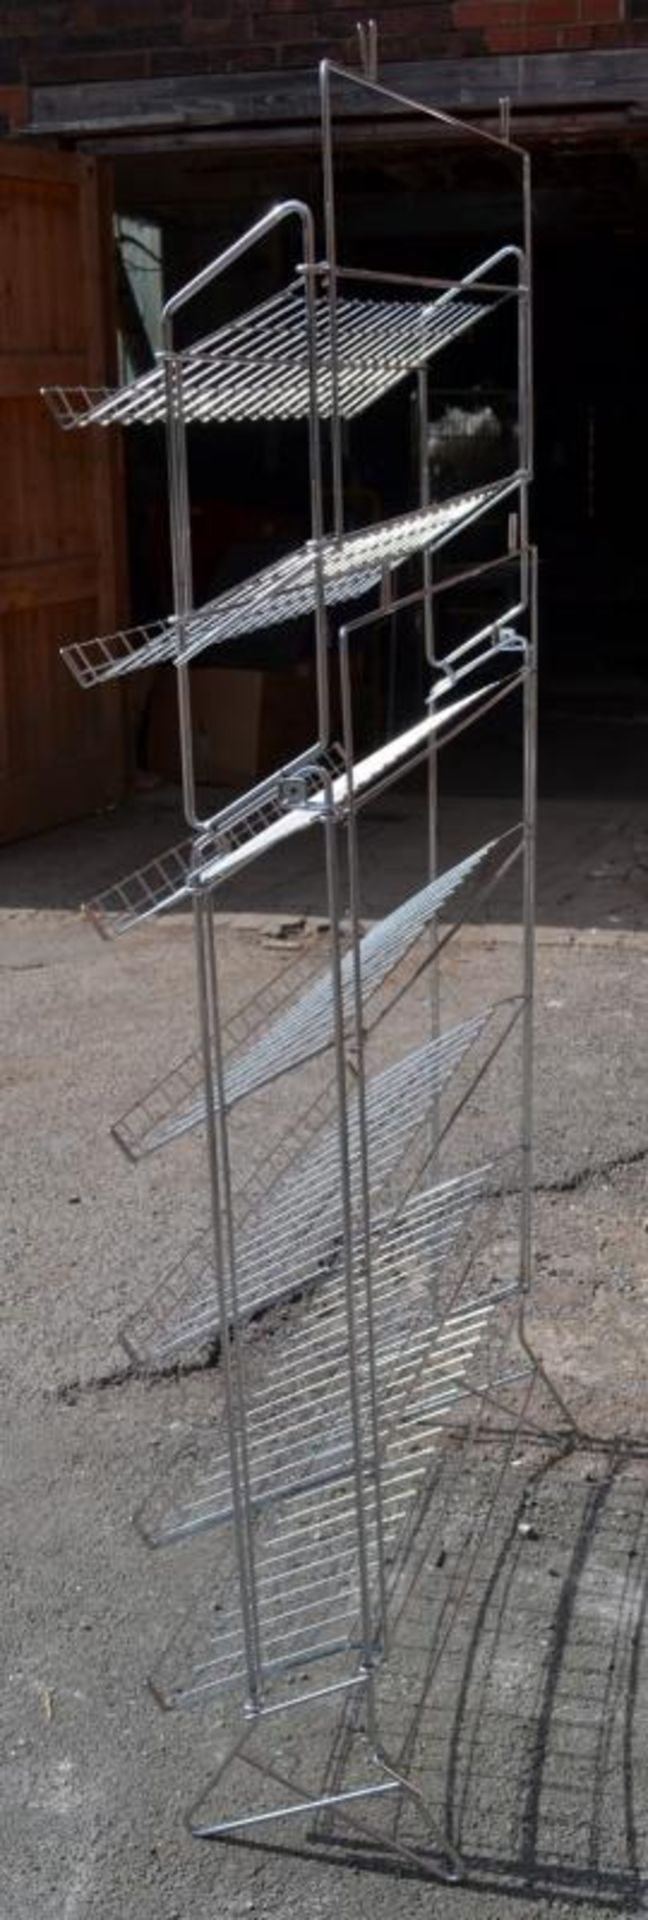 9 x Freestanding Retail Shoe Display Racks - Recently Removed From A Major UK Store - Chrome Finish - Image 4 of 4